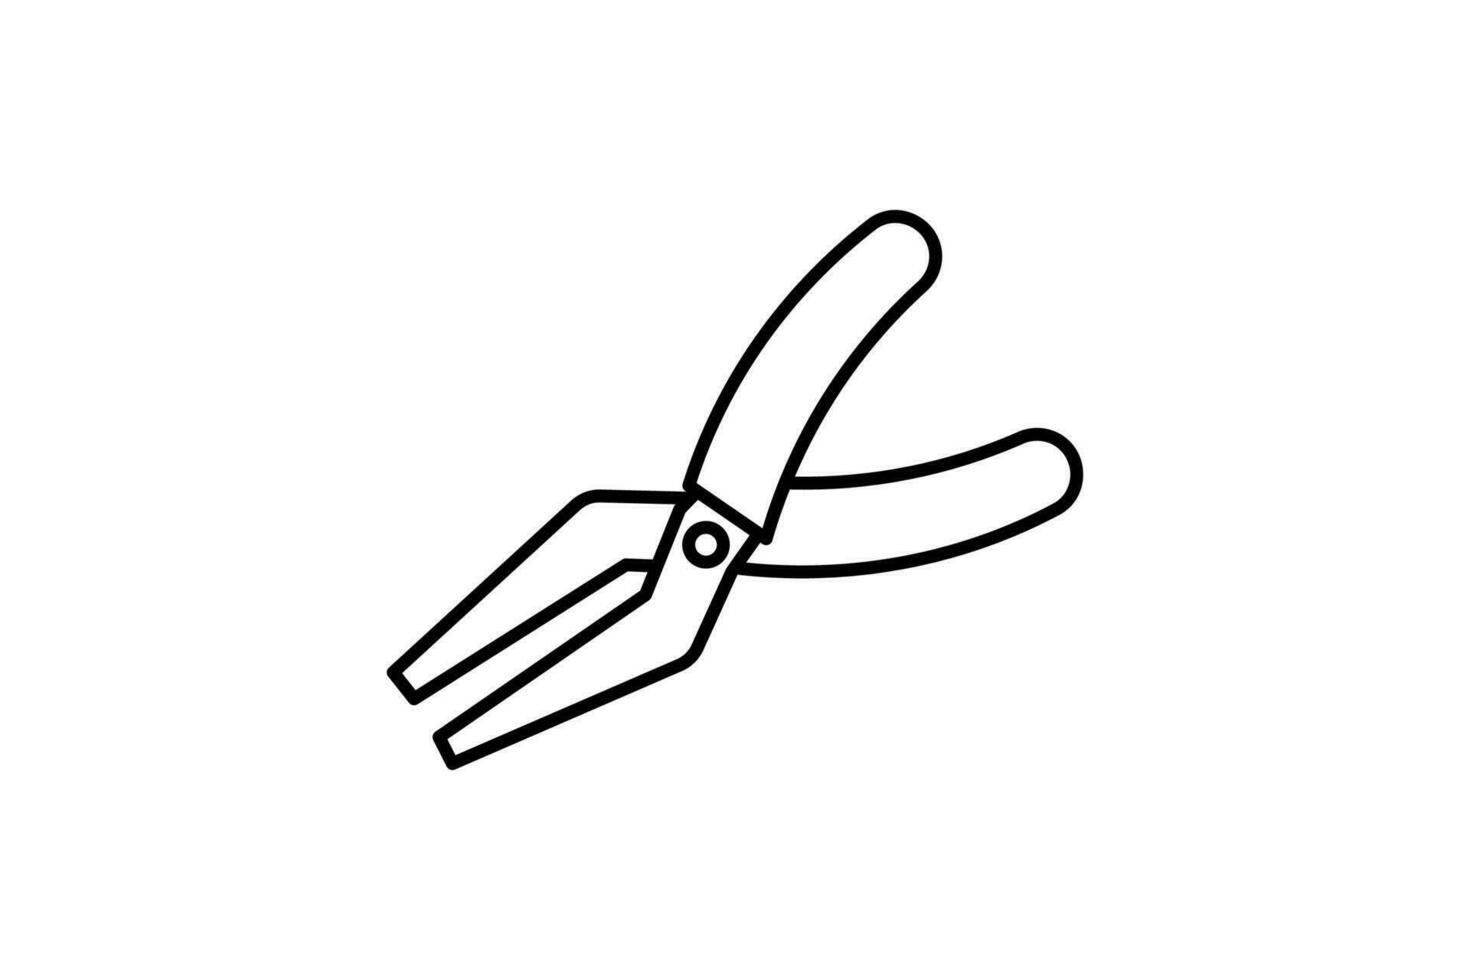 Pliers Icon. Icon related to gripping, cutting, crafting, applications, user interfaces. line icon style. Simple vector design editable